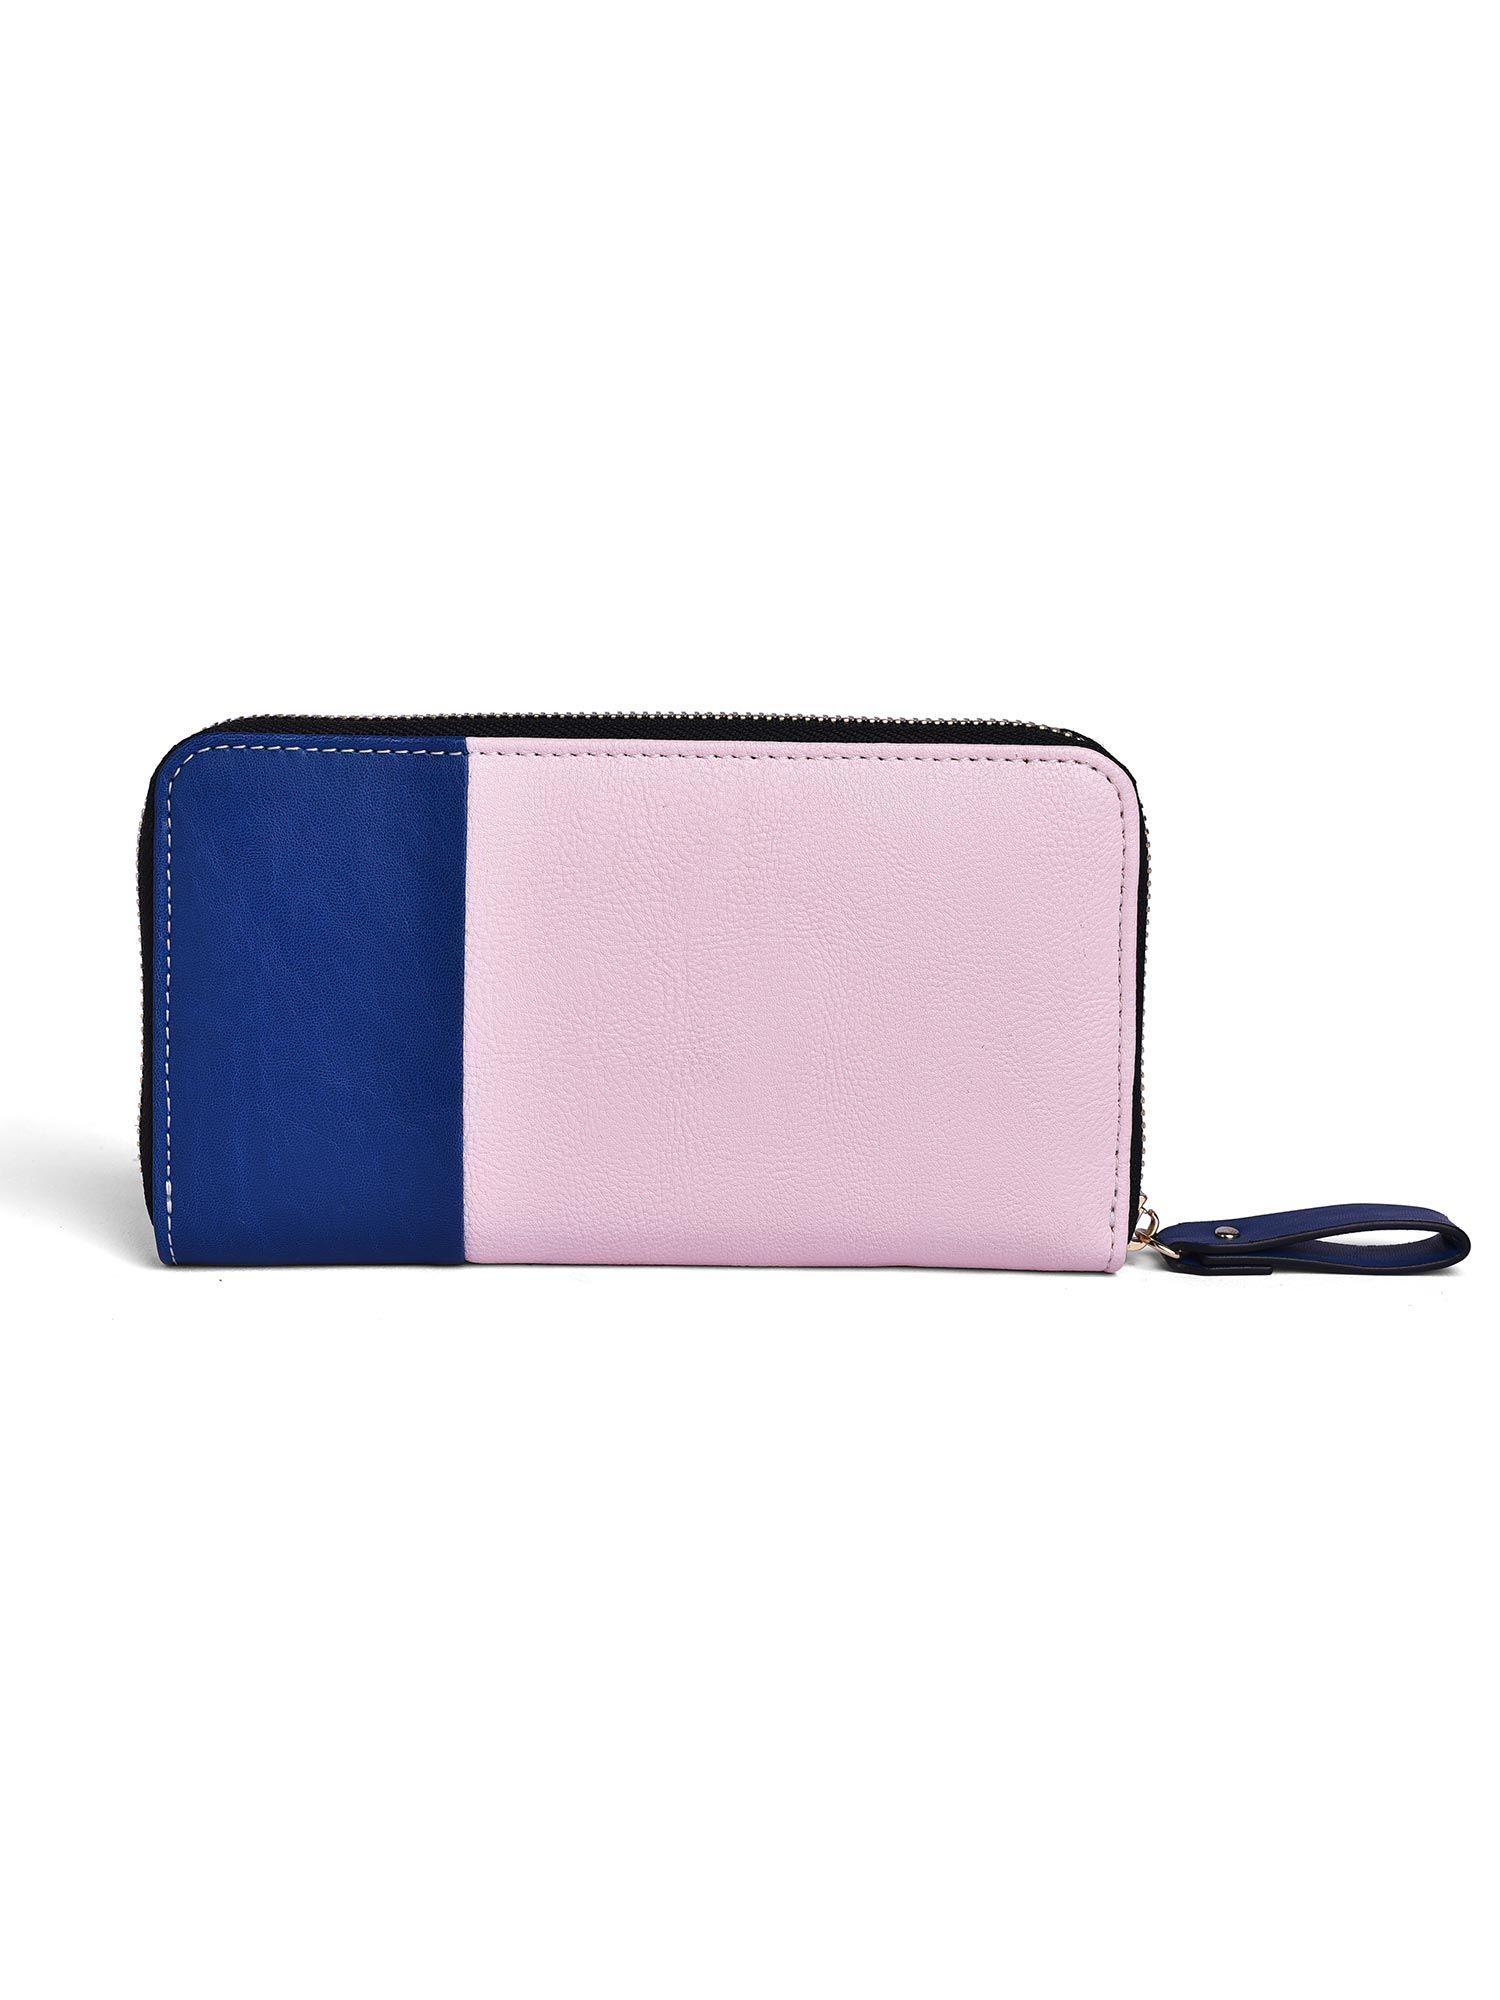 faux leather baby pink navy blue womens wallet